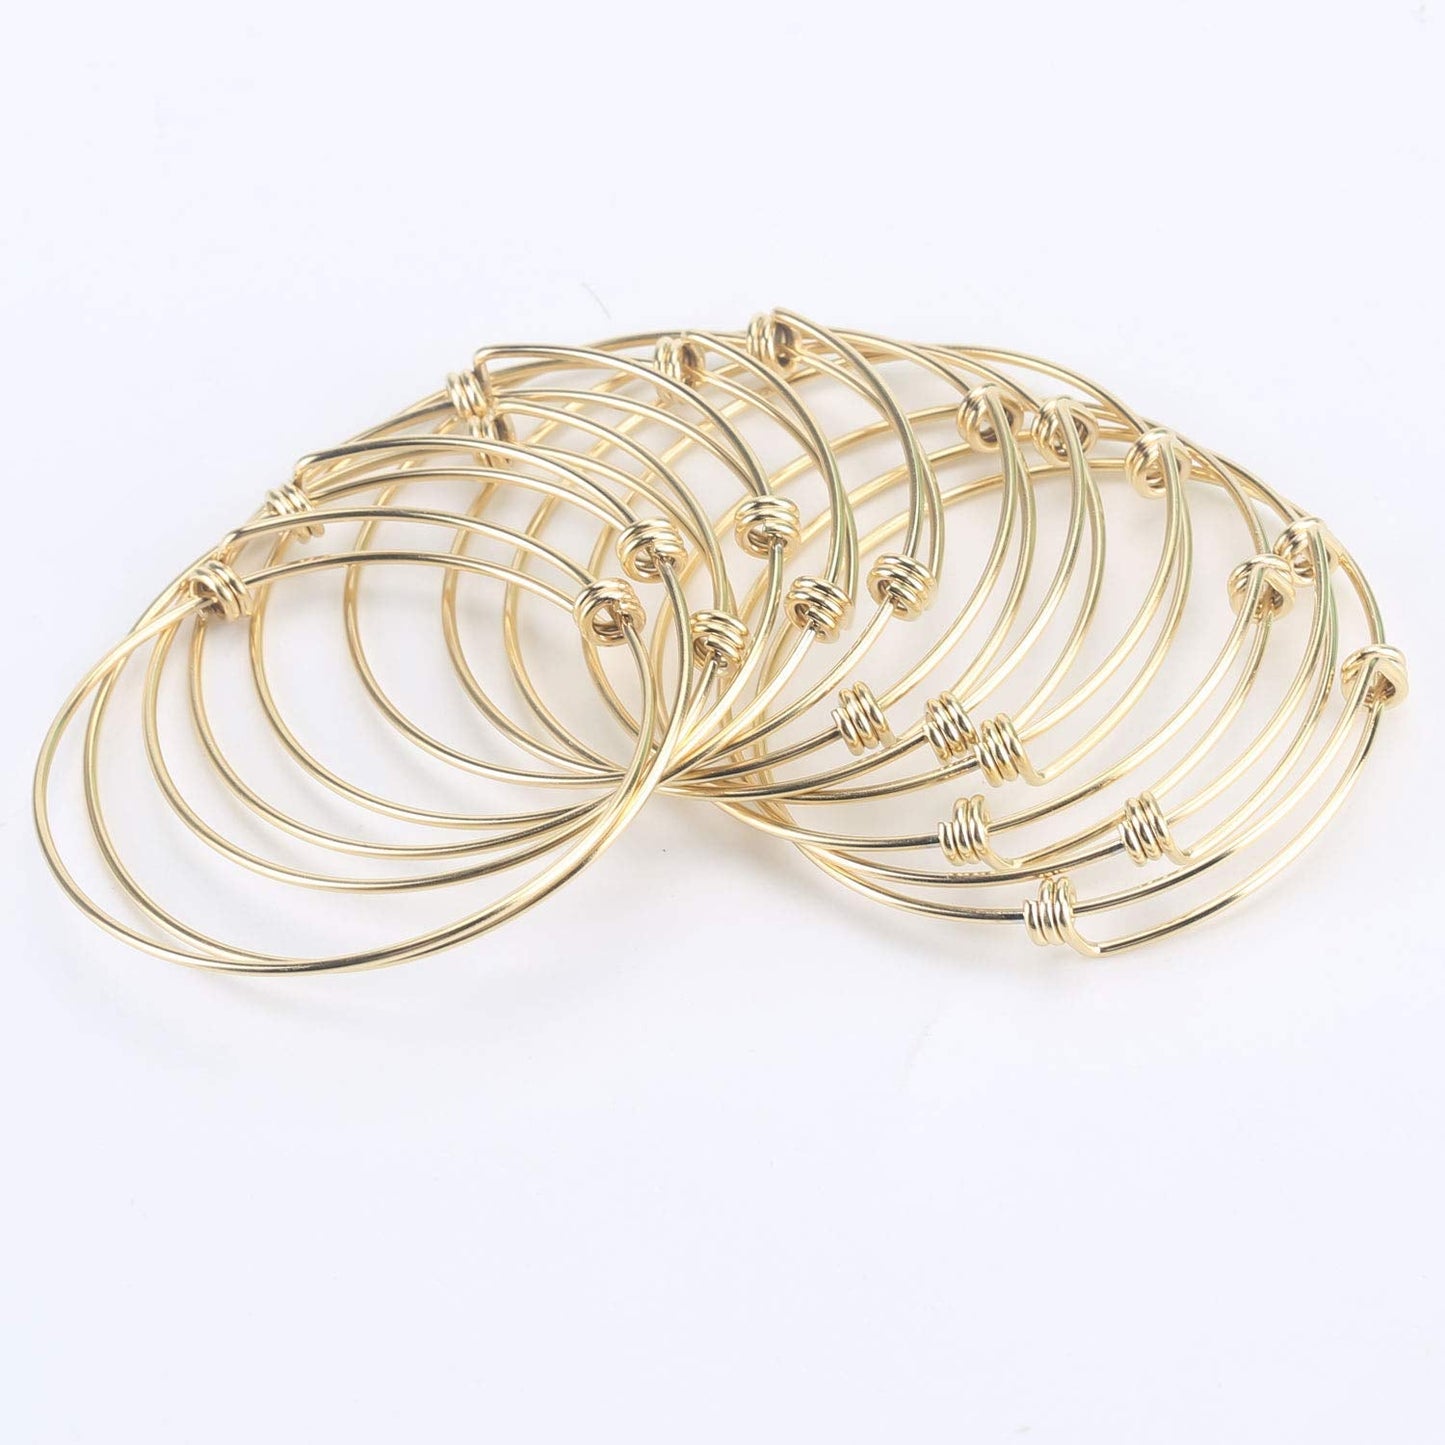 12 PCS Gold Plated Stainless Steel Wire Blank Adjustable Bangle Bracelet 2.6 - 3 Inches - Alexcraft®